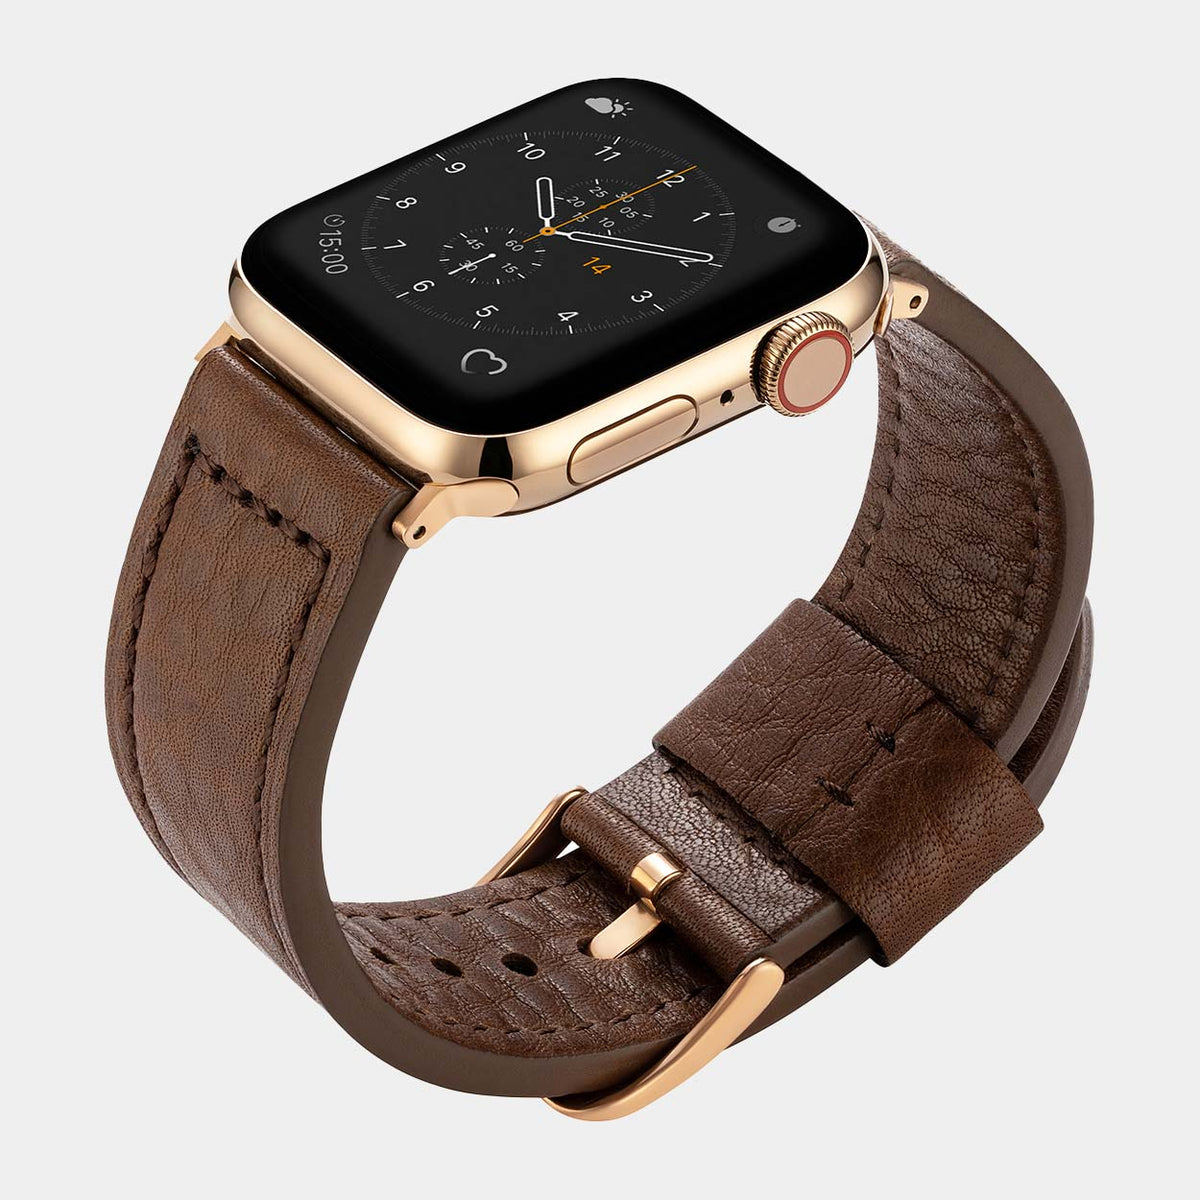 Lond Luxury Brown Leather Apple Watch Strap